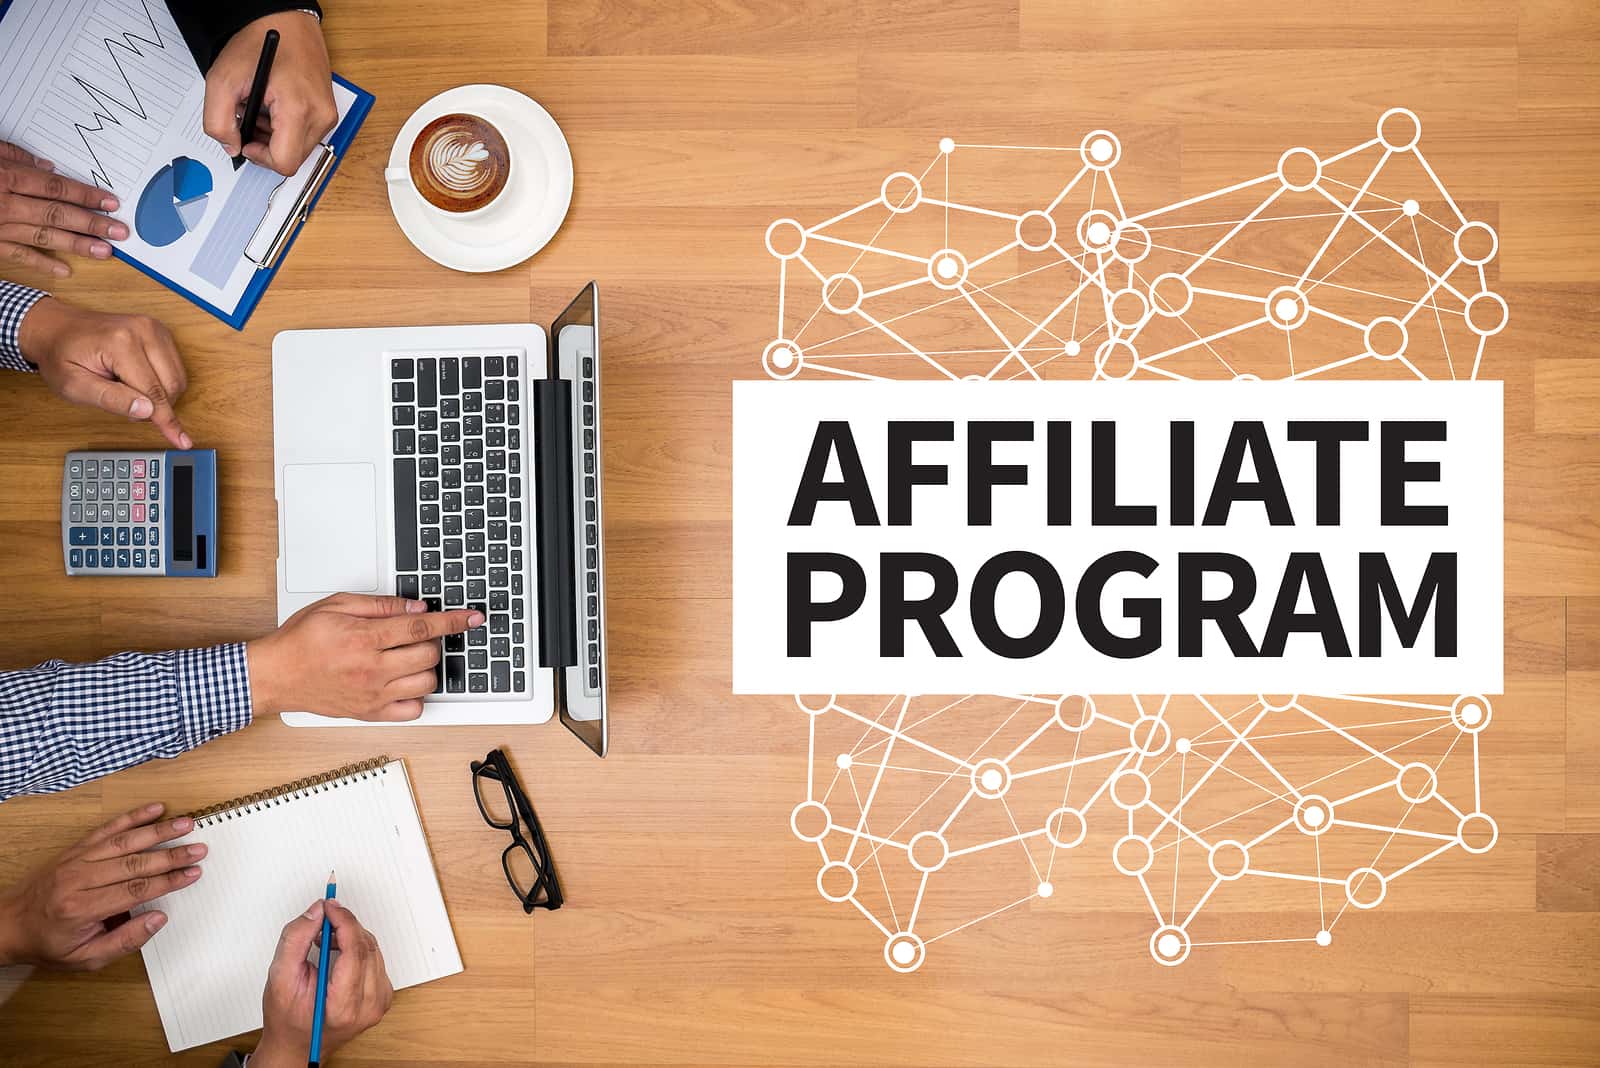 What is CBD Affiliate Program and How Does it Work